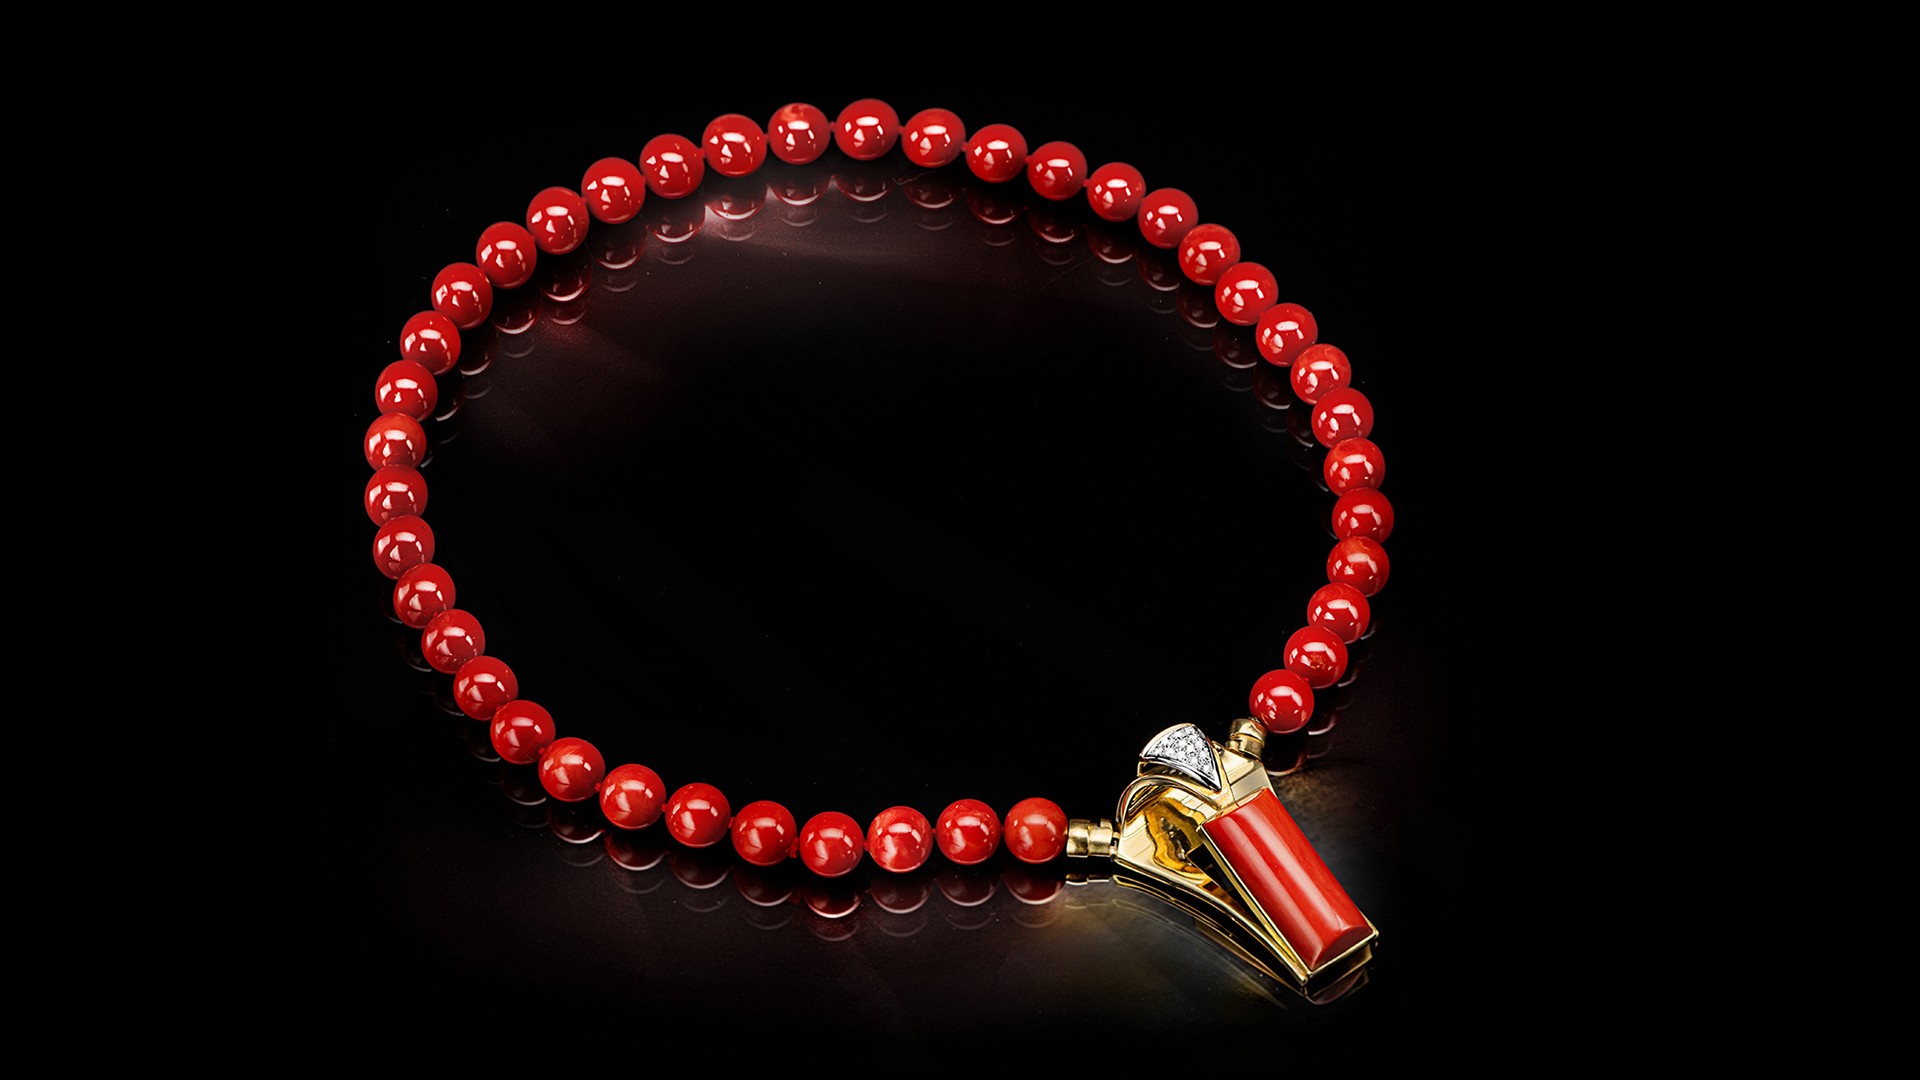 red coral necklace with precious stones and golden details